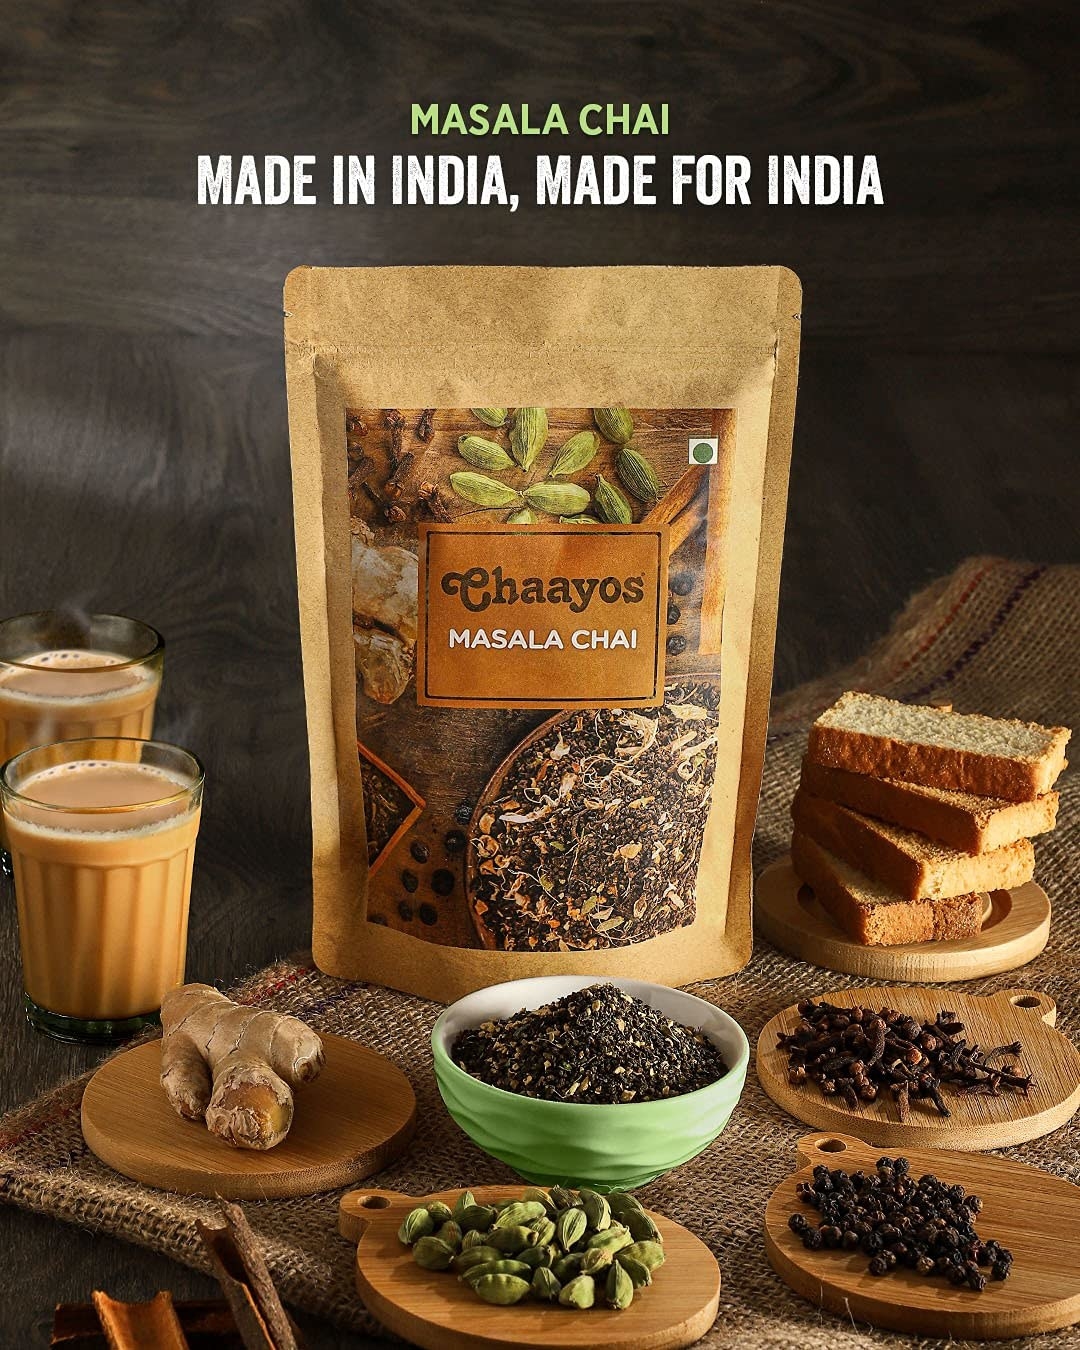 A pack of Masala chai surrounded by whole spices, a stack of rusk and cups of chai.